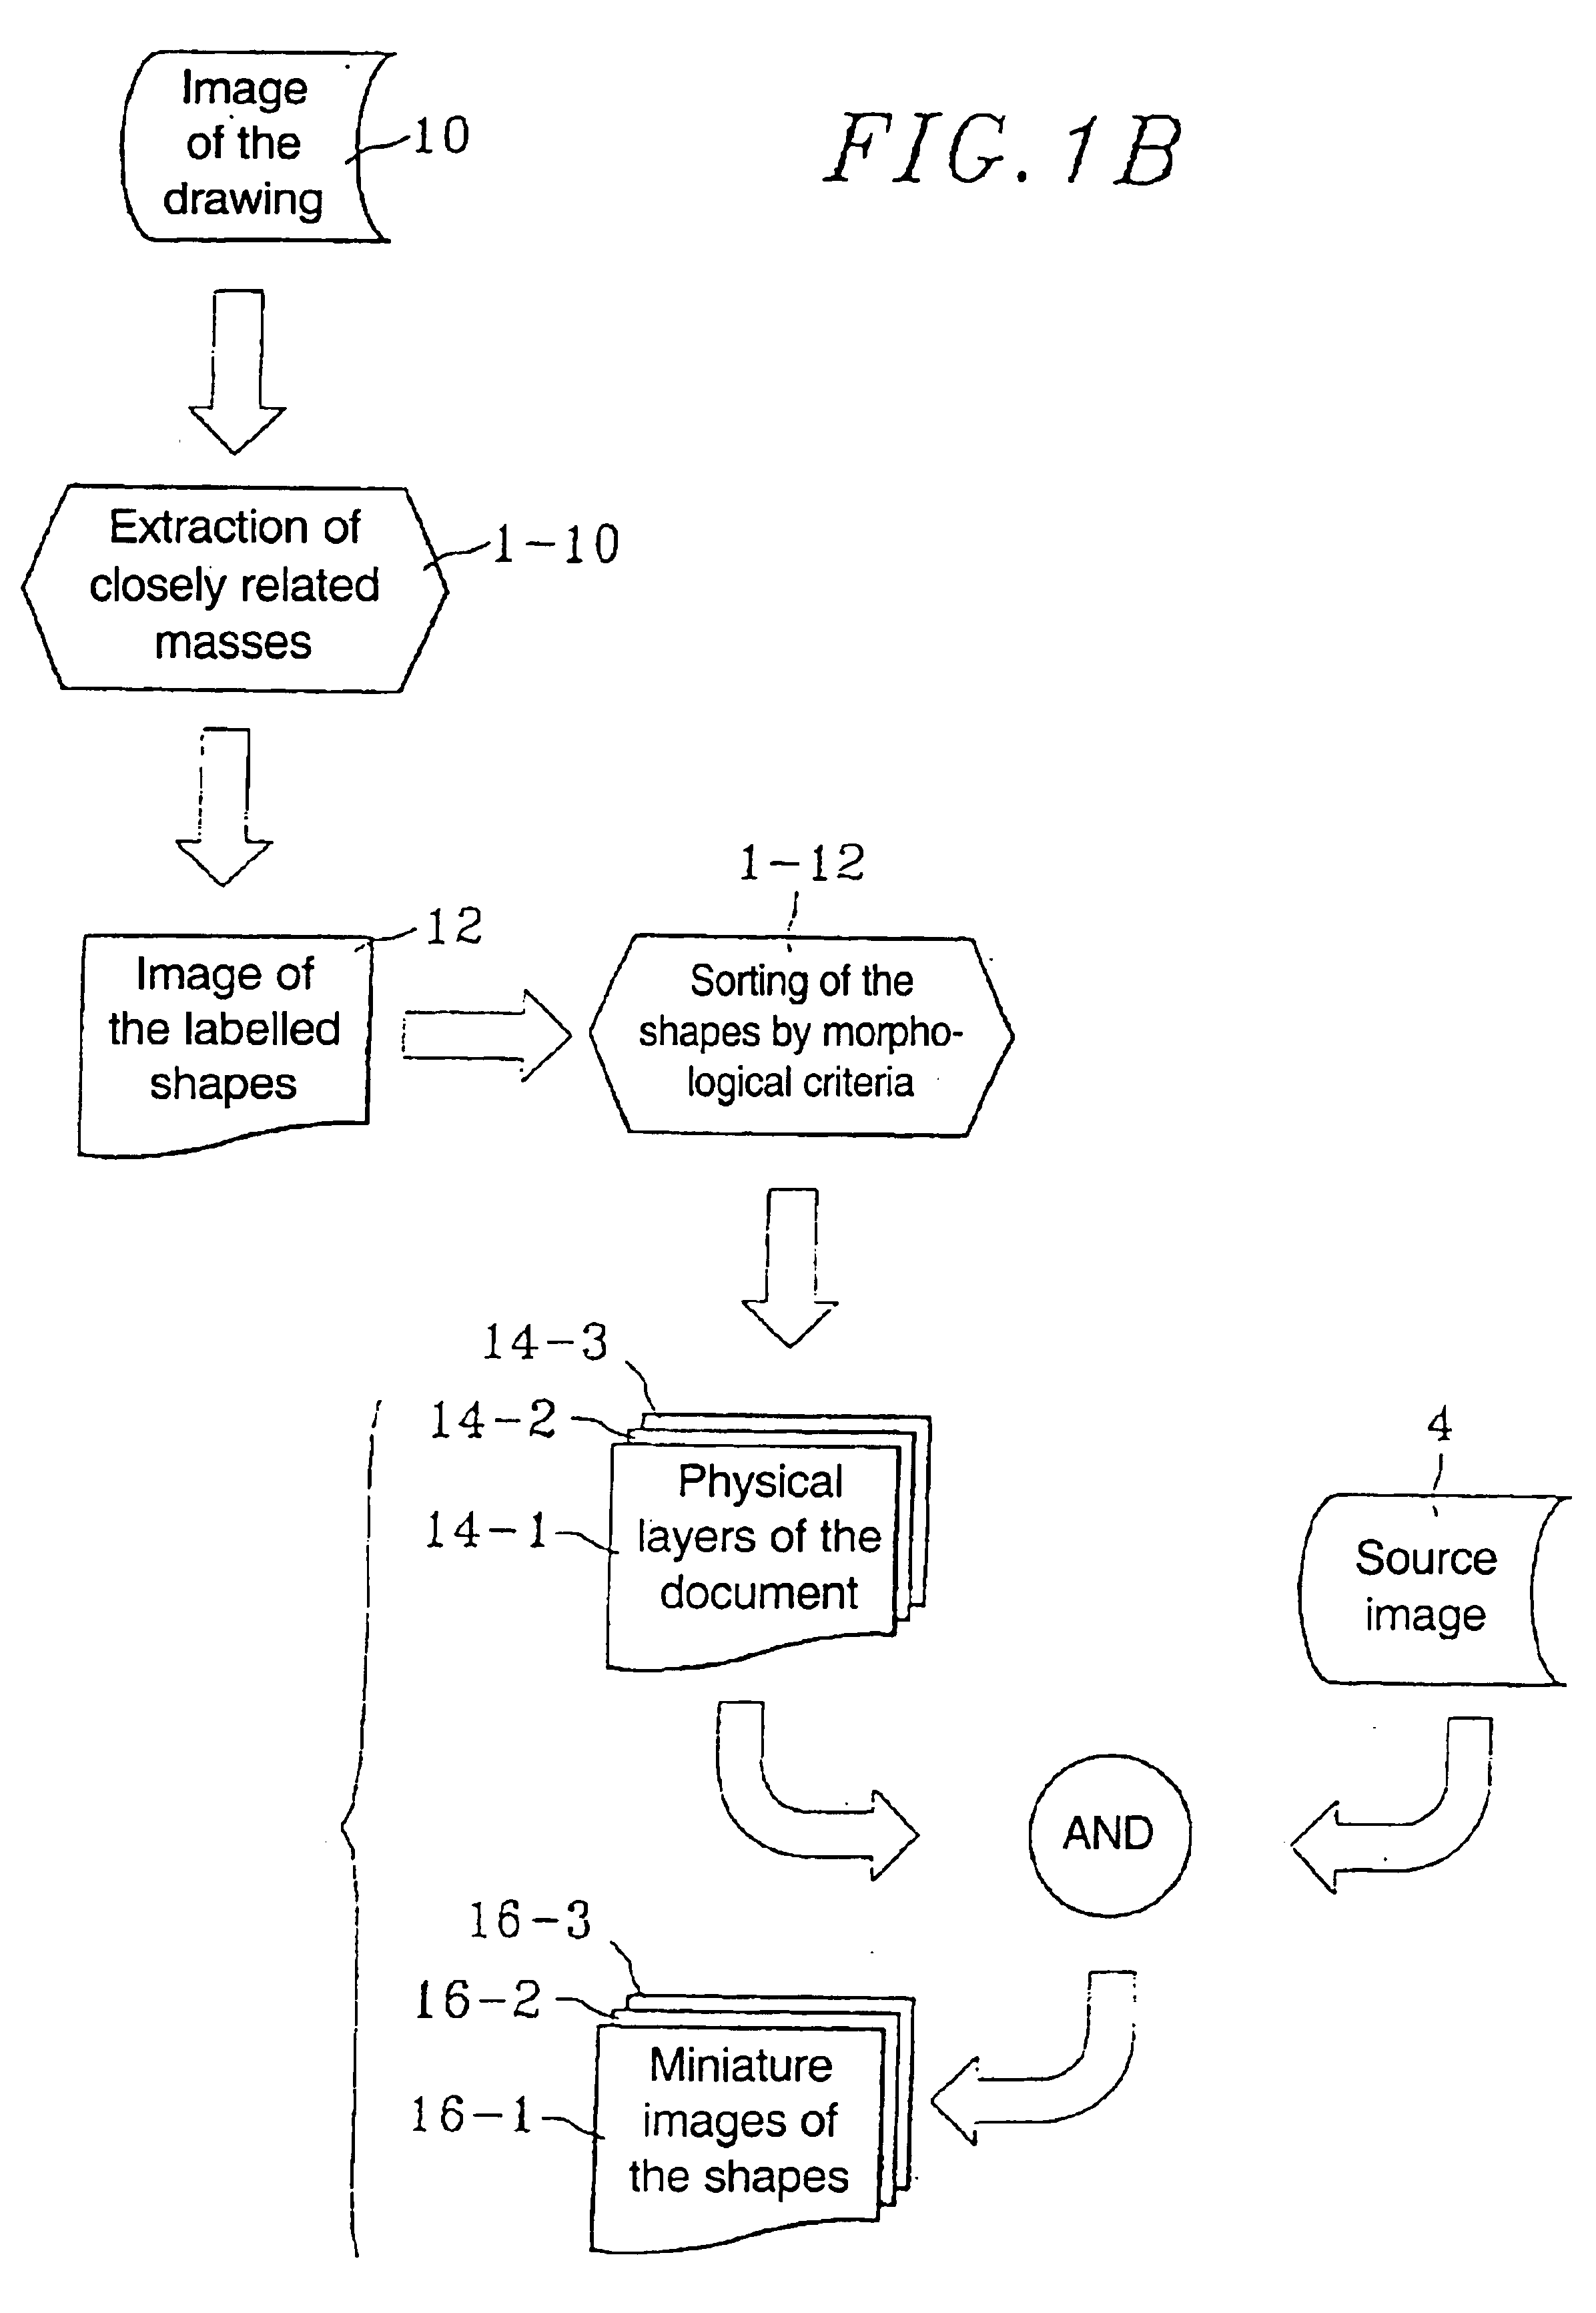 Method for segmenting and identifying a document, in particular a technical chart